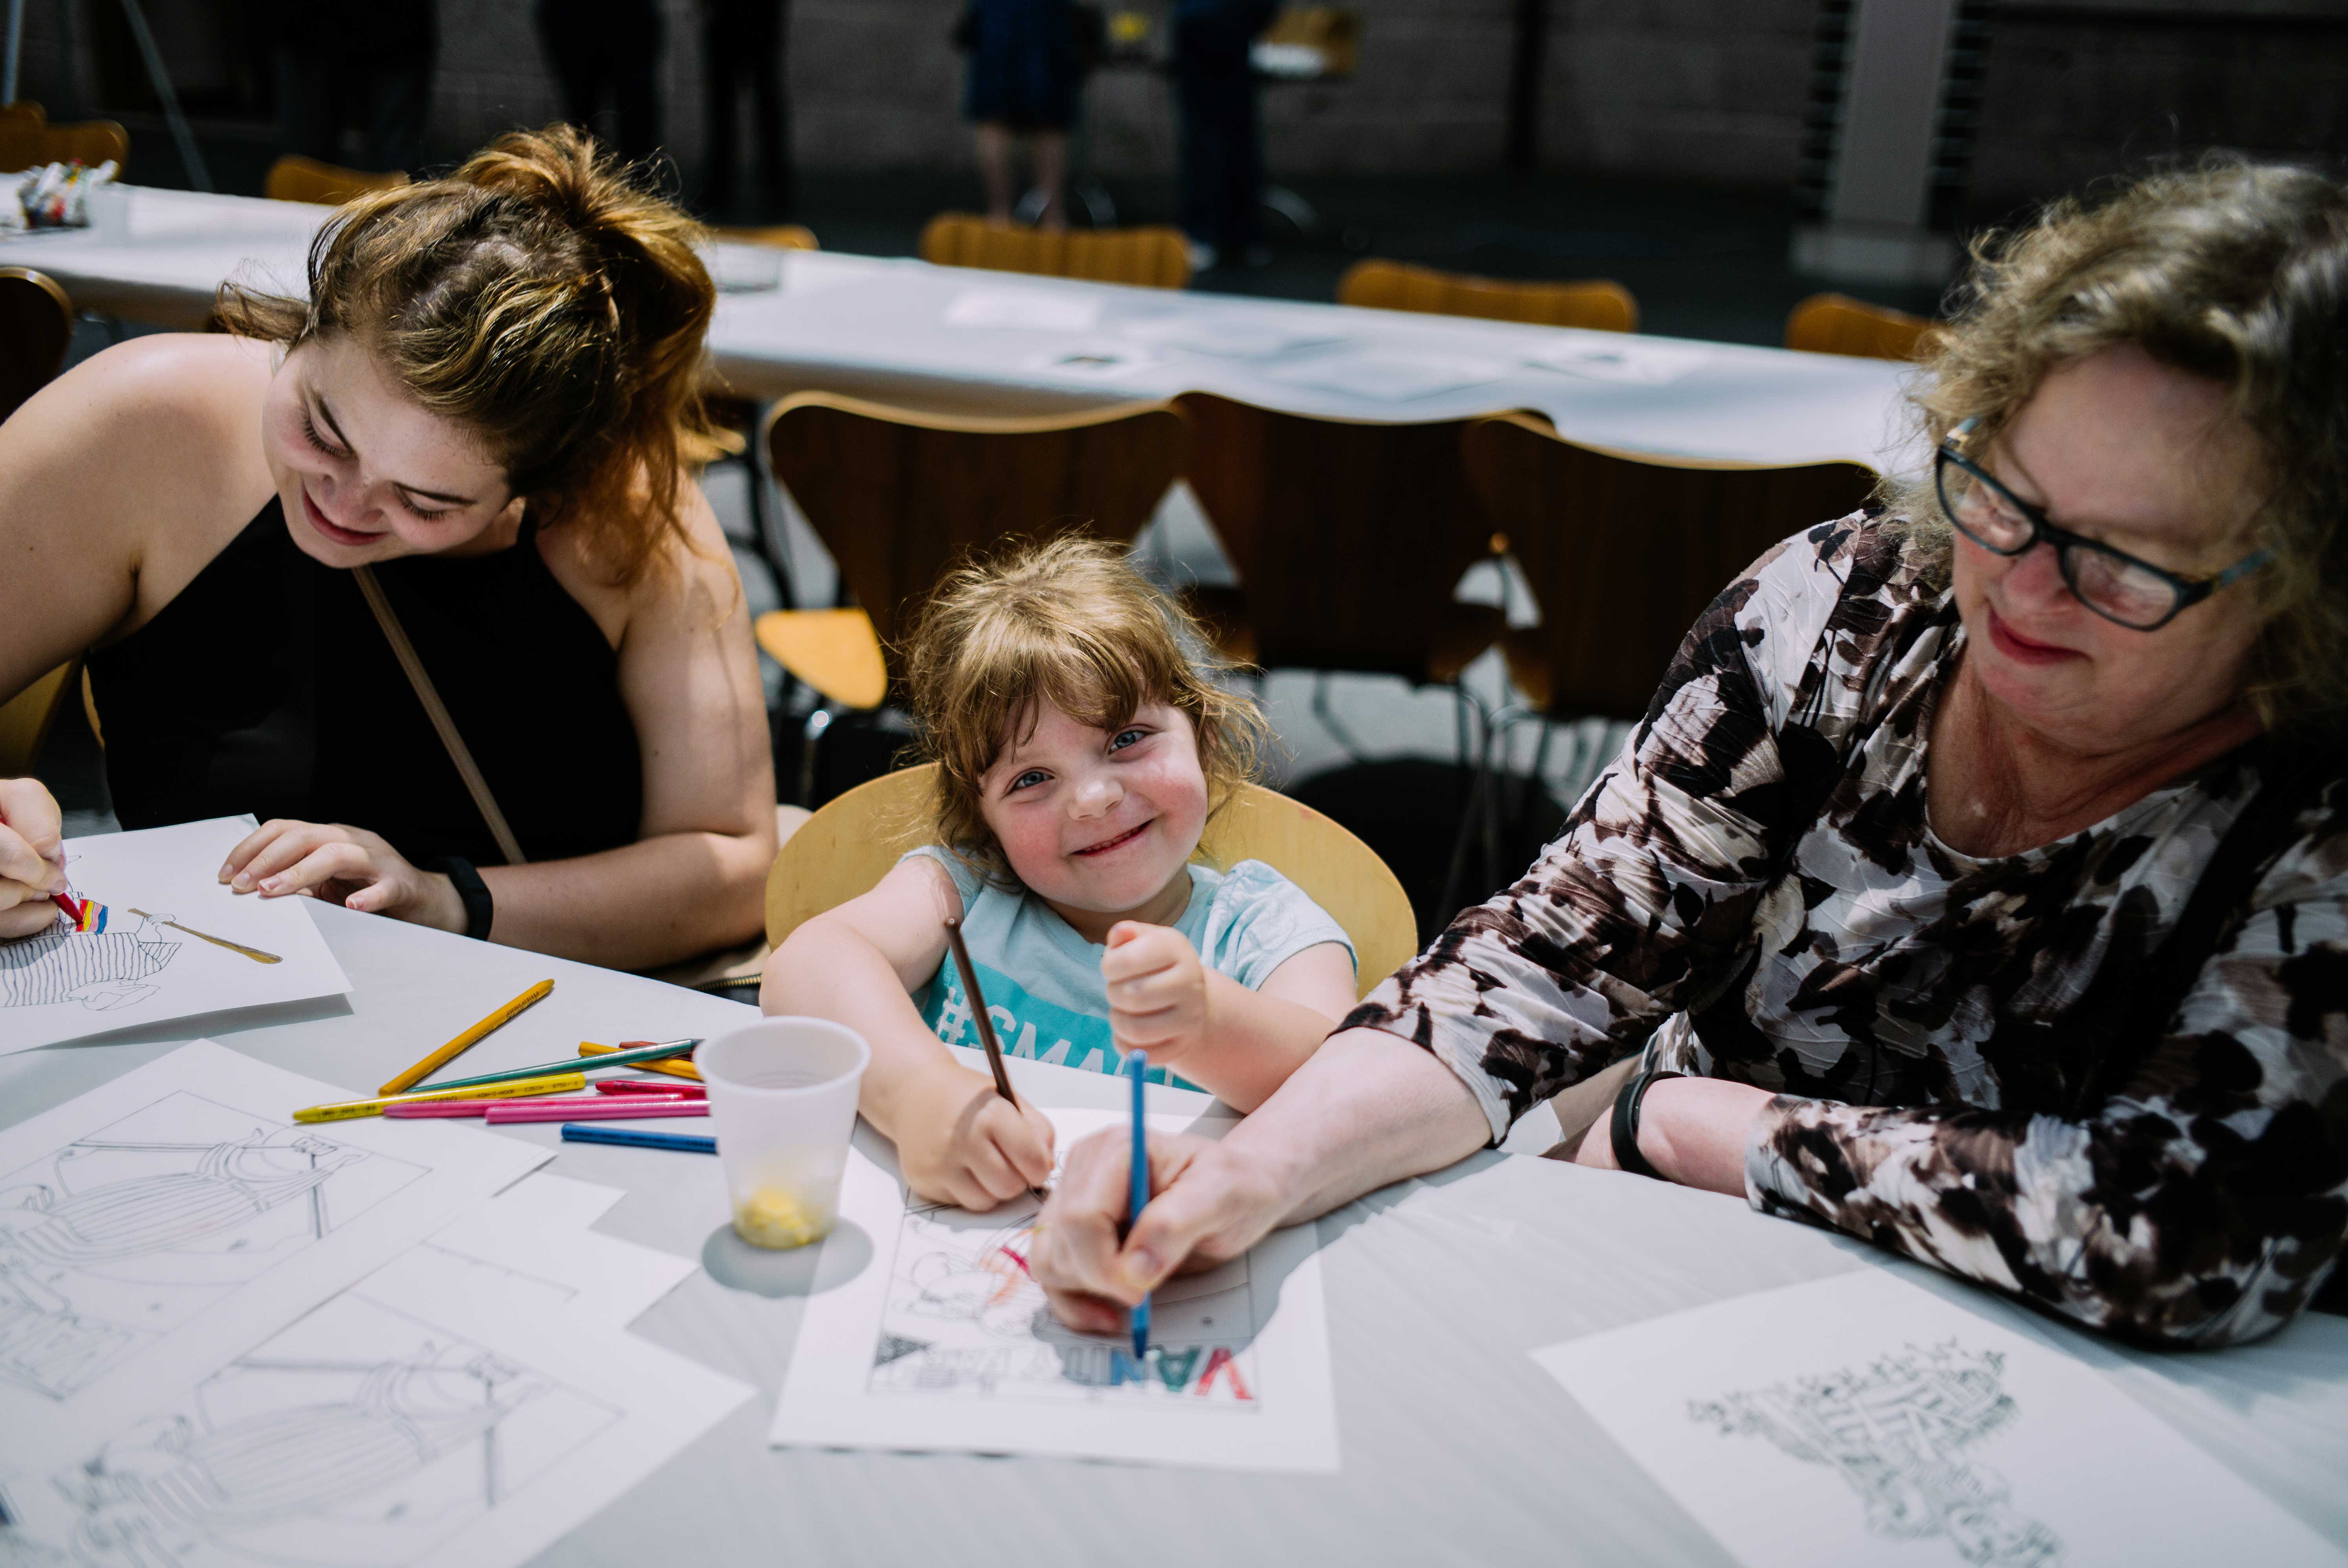 Photograph of two woman and a small girl coloring at a table and smiling